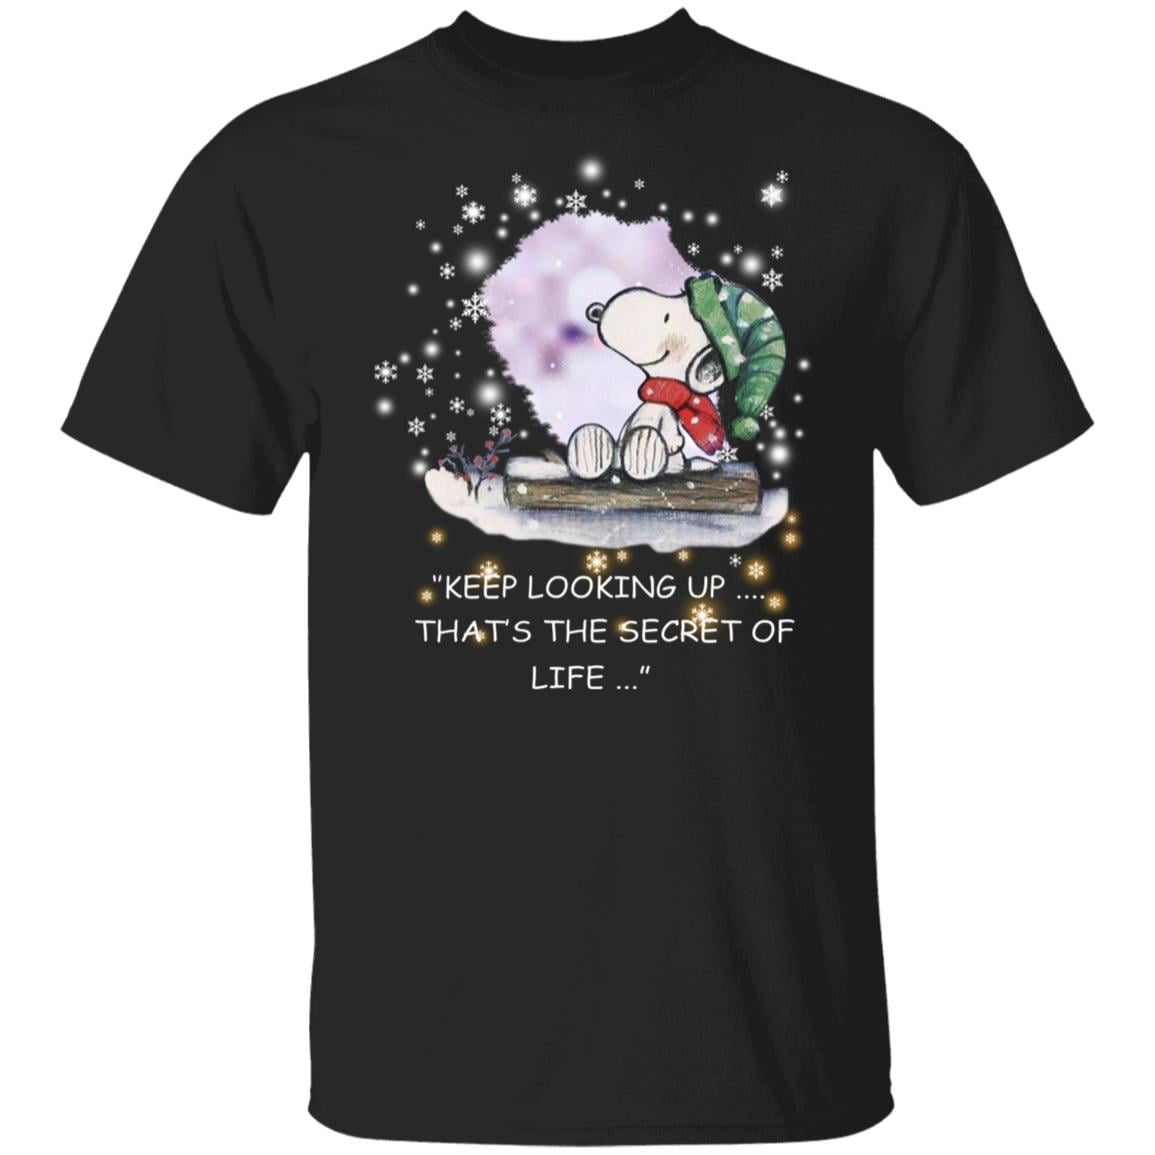 Snoopy And Woodstock Keep Looking Up That S The Secret Of Life Shirt Hersmiles